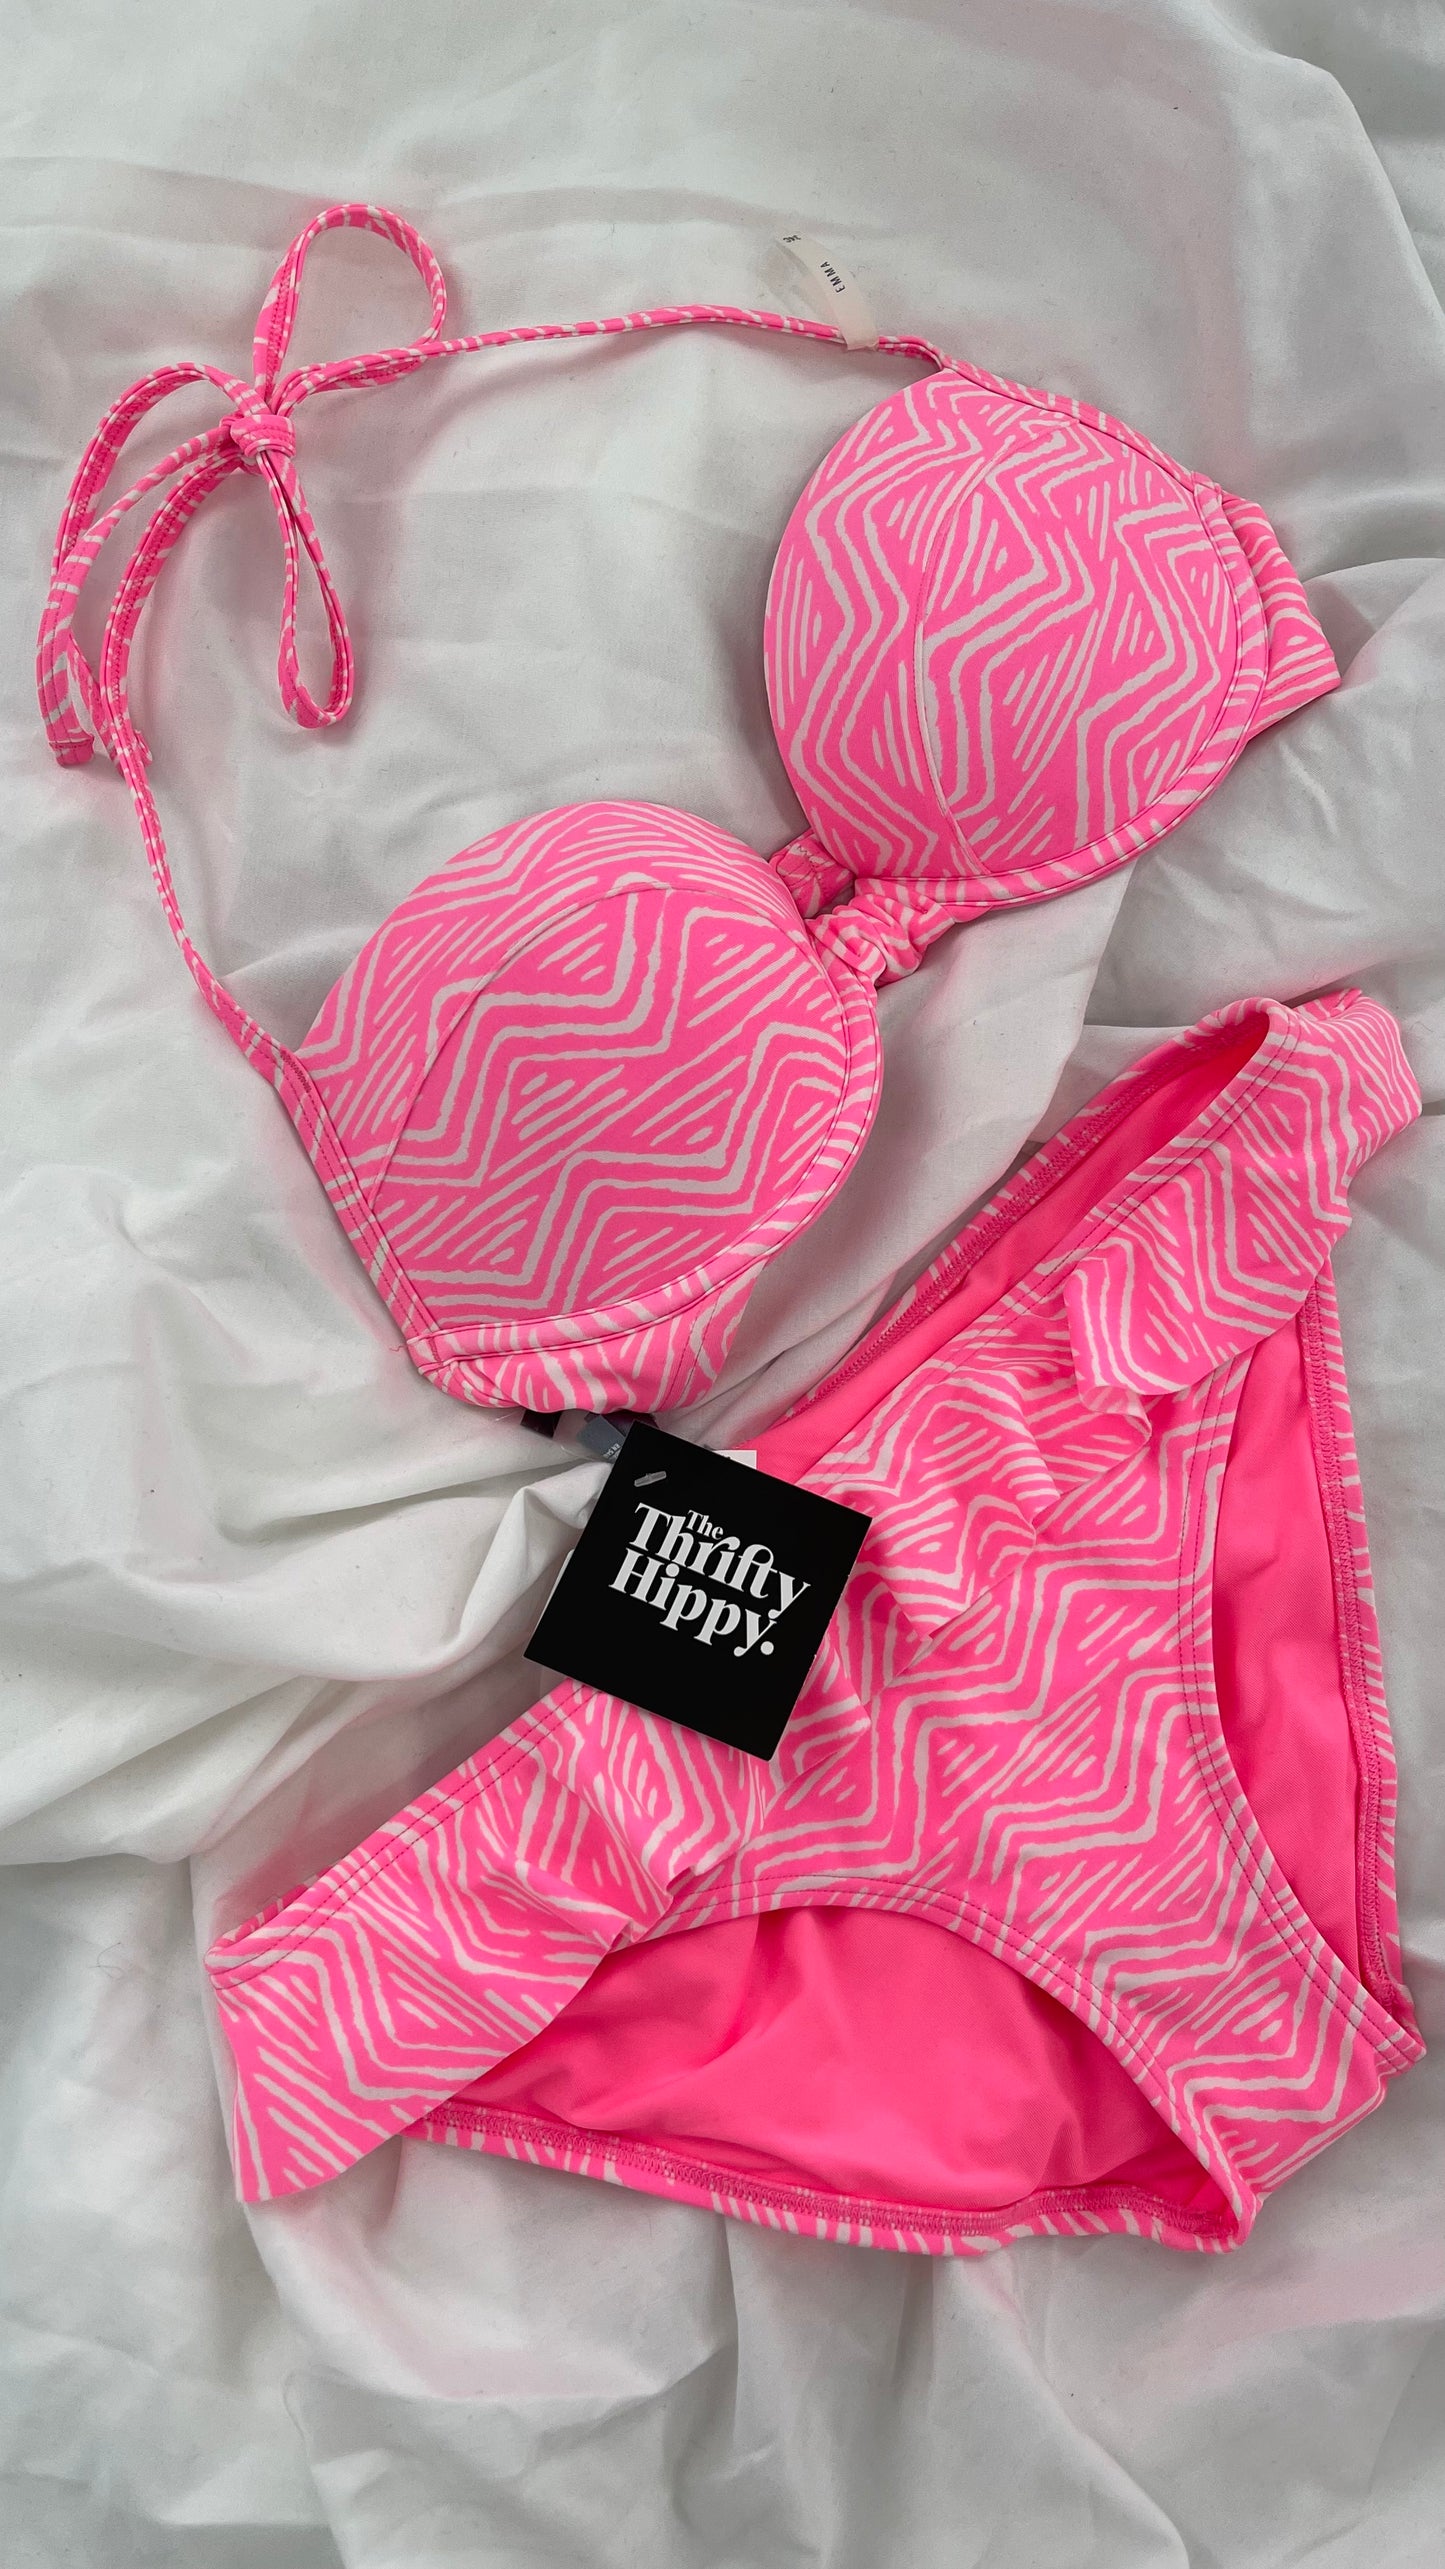 AERIE Pink Swim Set with Padded Underwire Top and Ruffled Bottoms (34C/M)